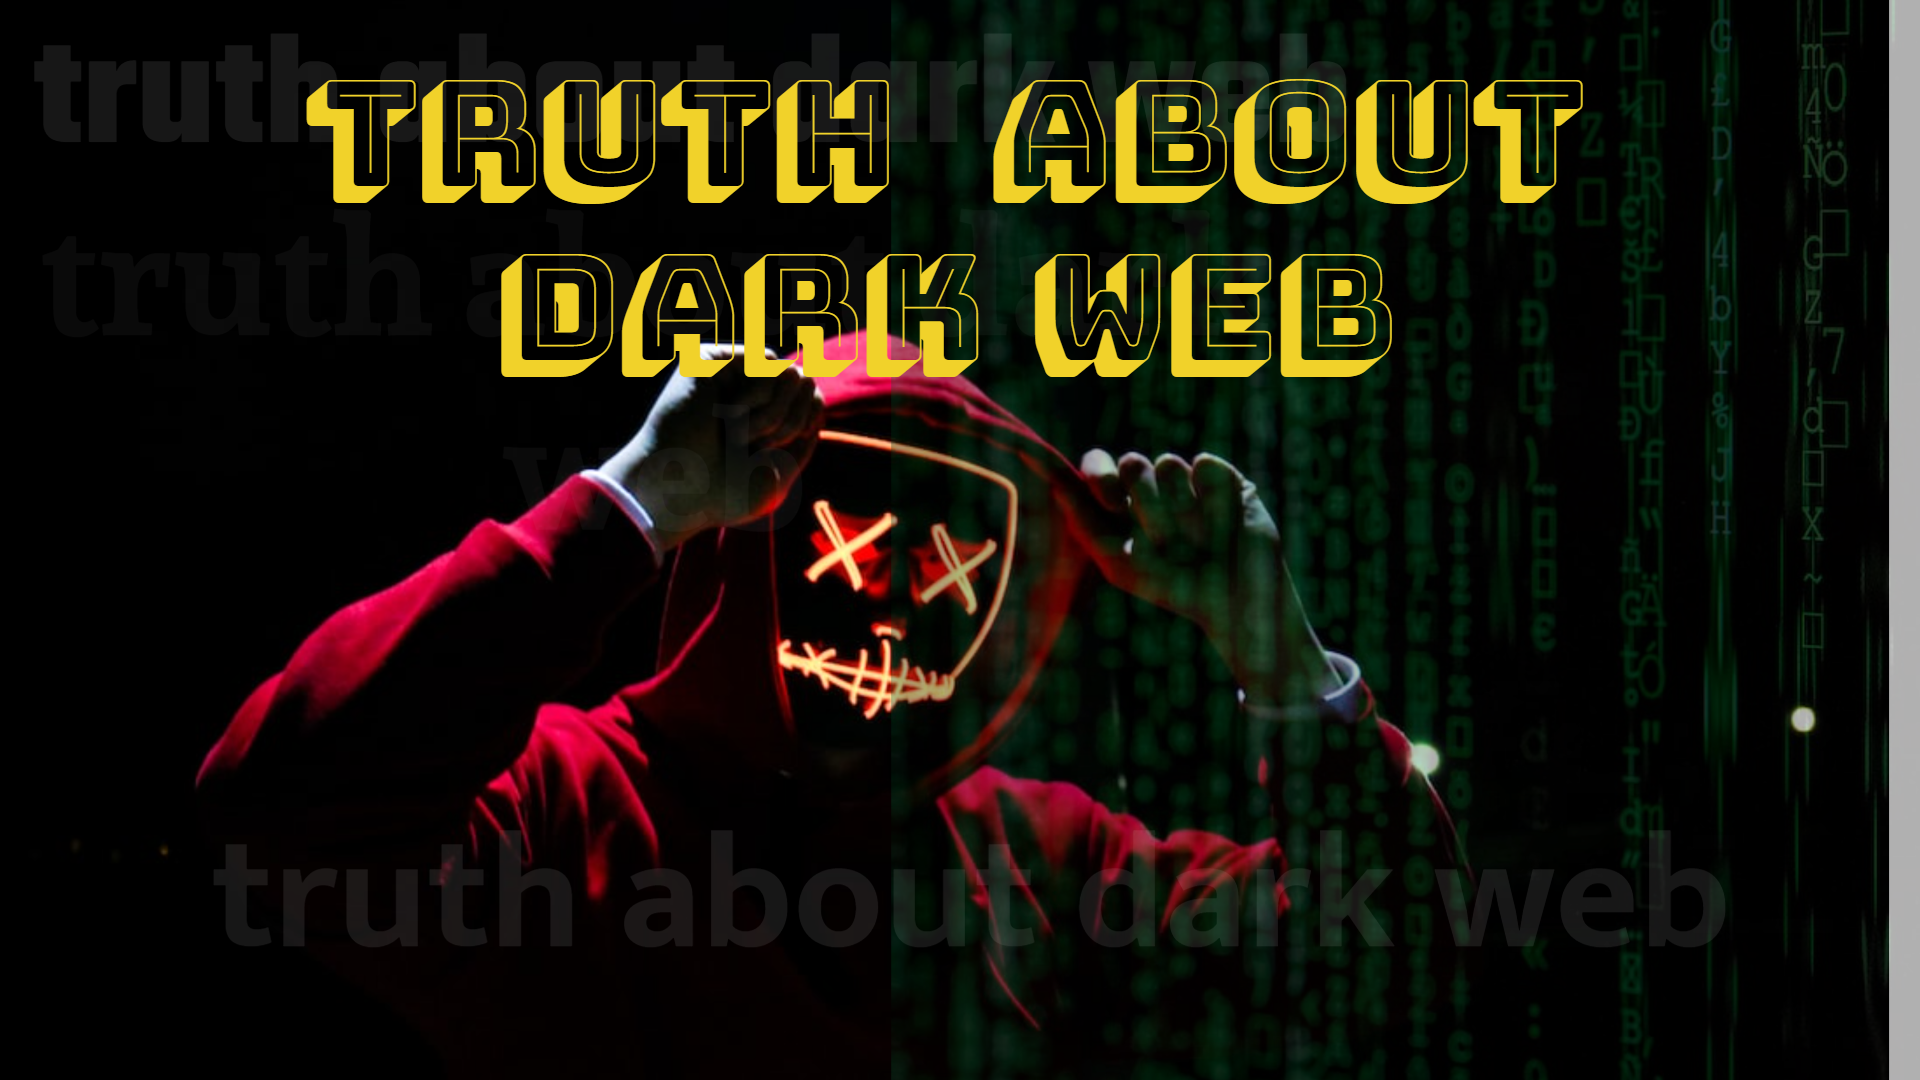 Explore Dark and Horrifying Stories on the Deep Web